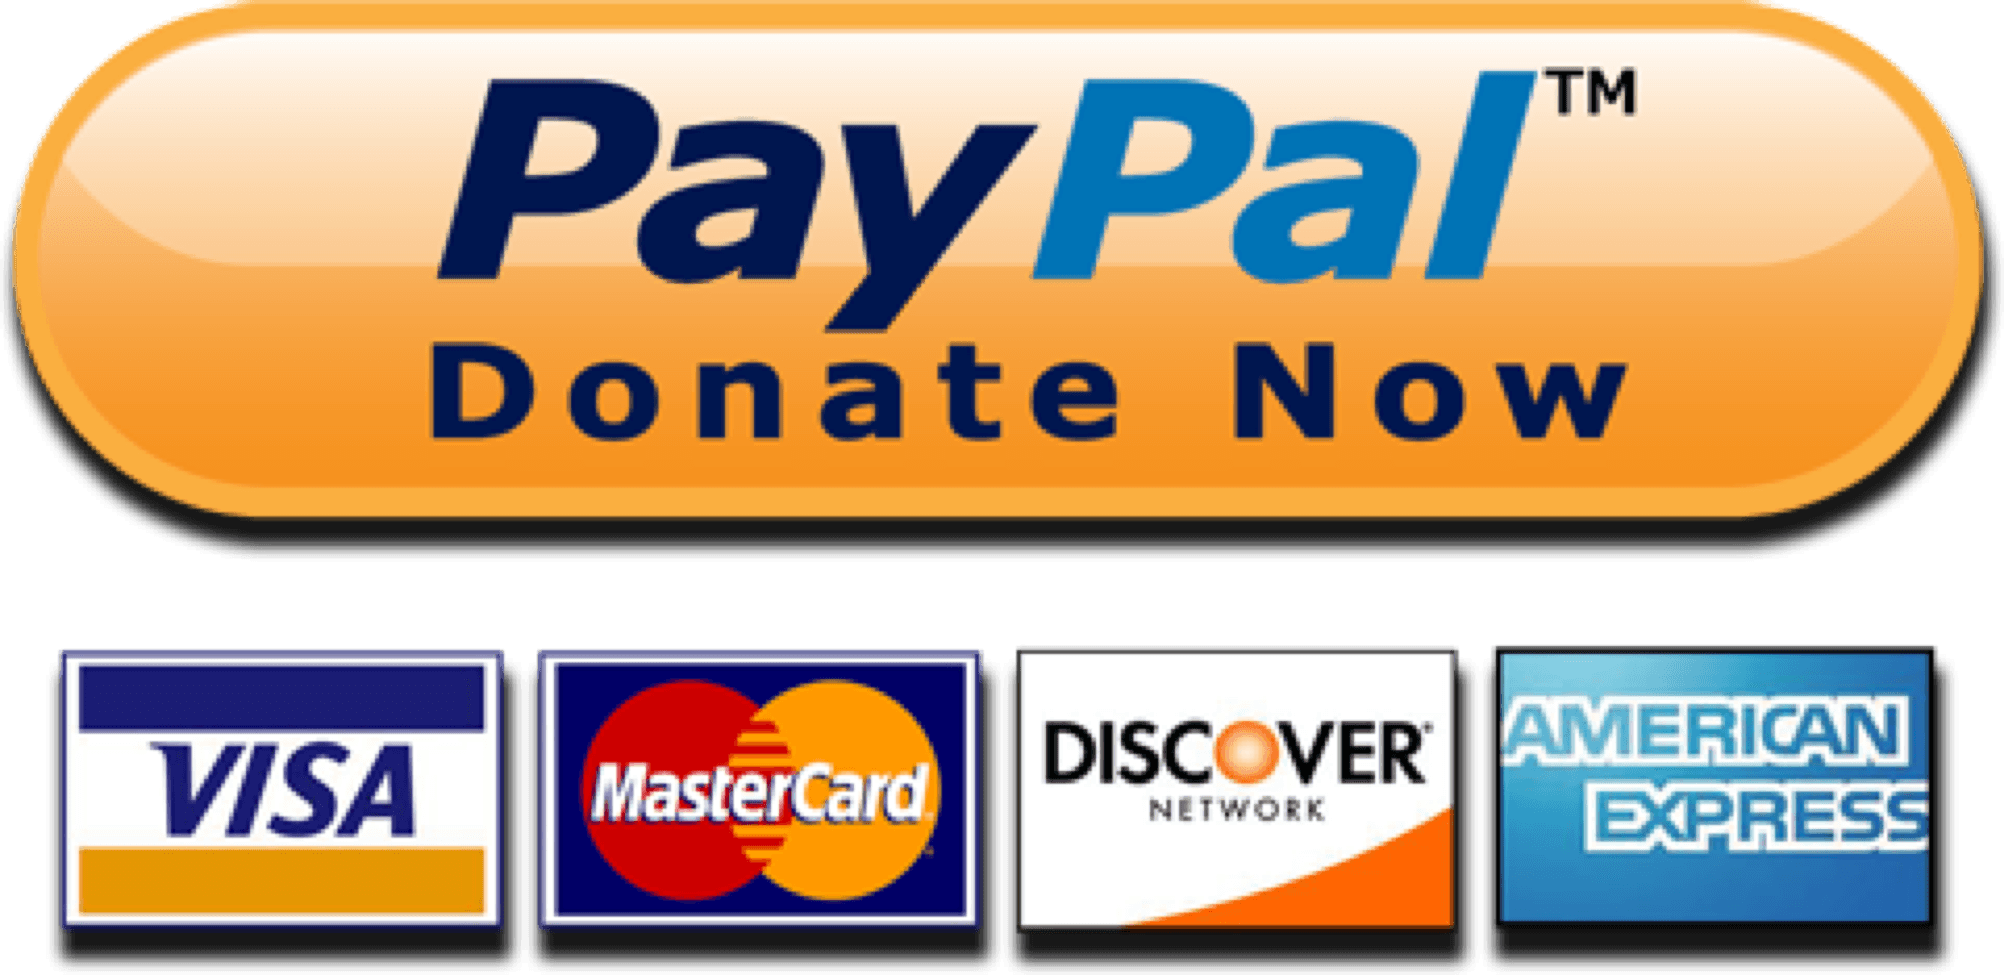 paypal donate button